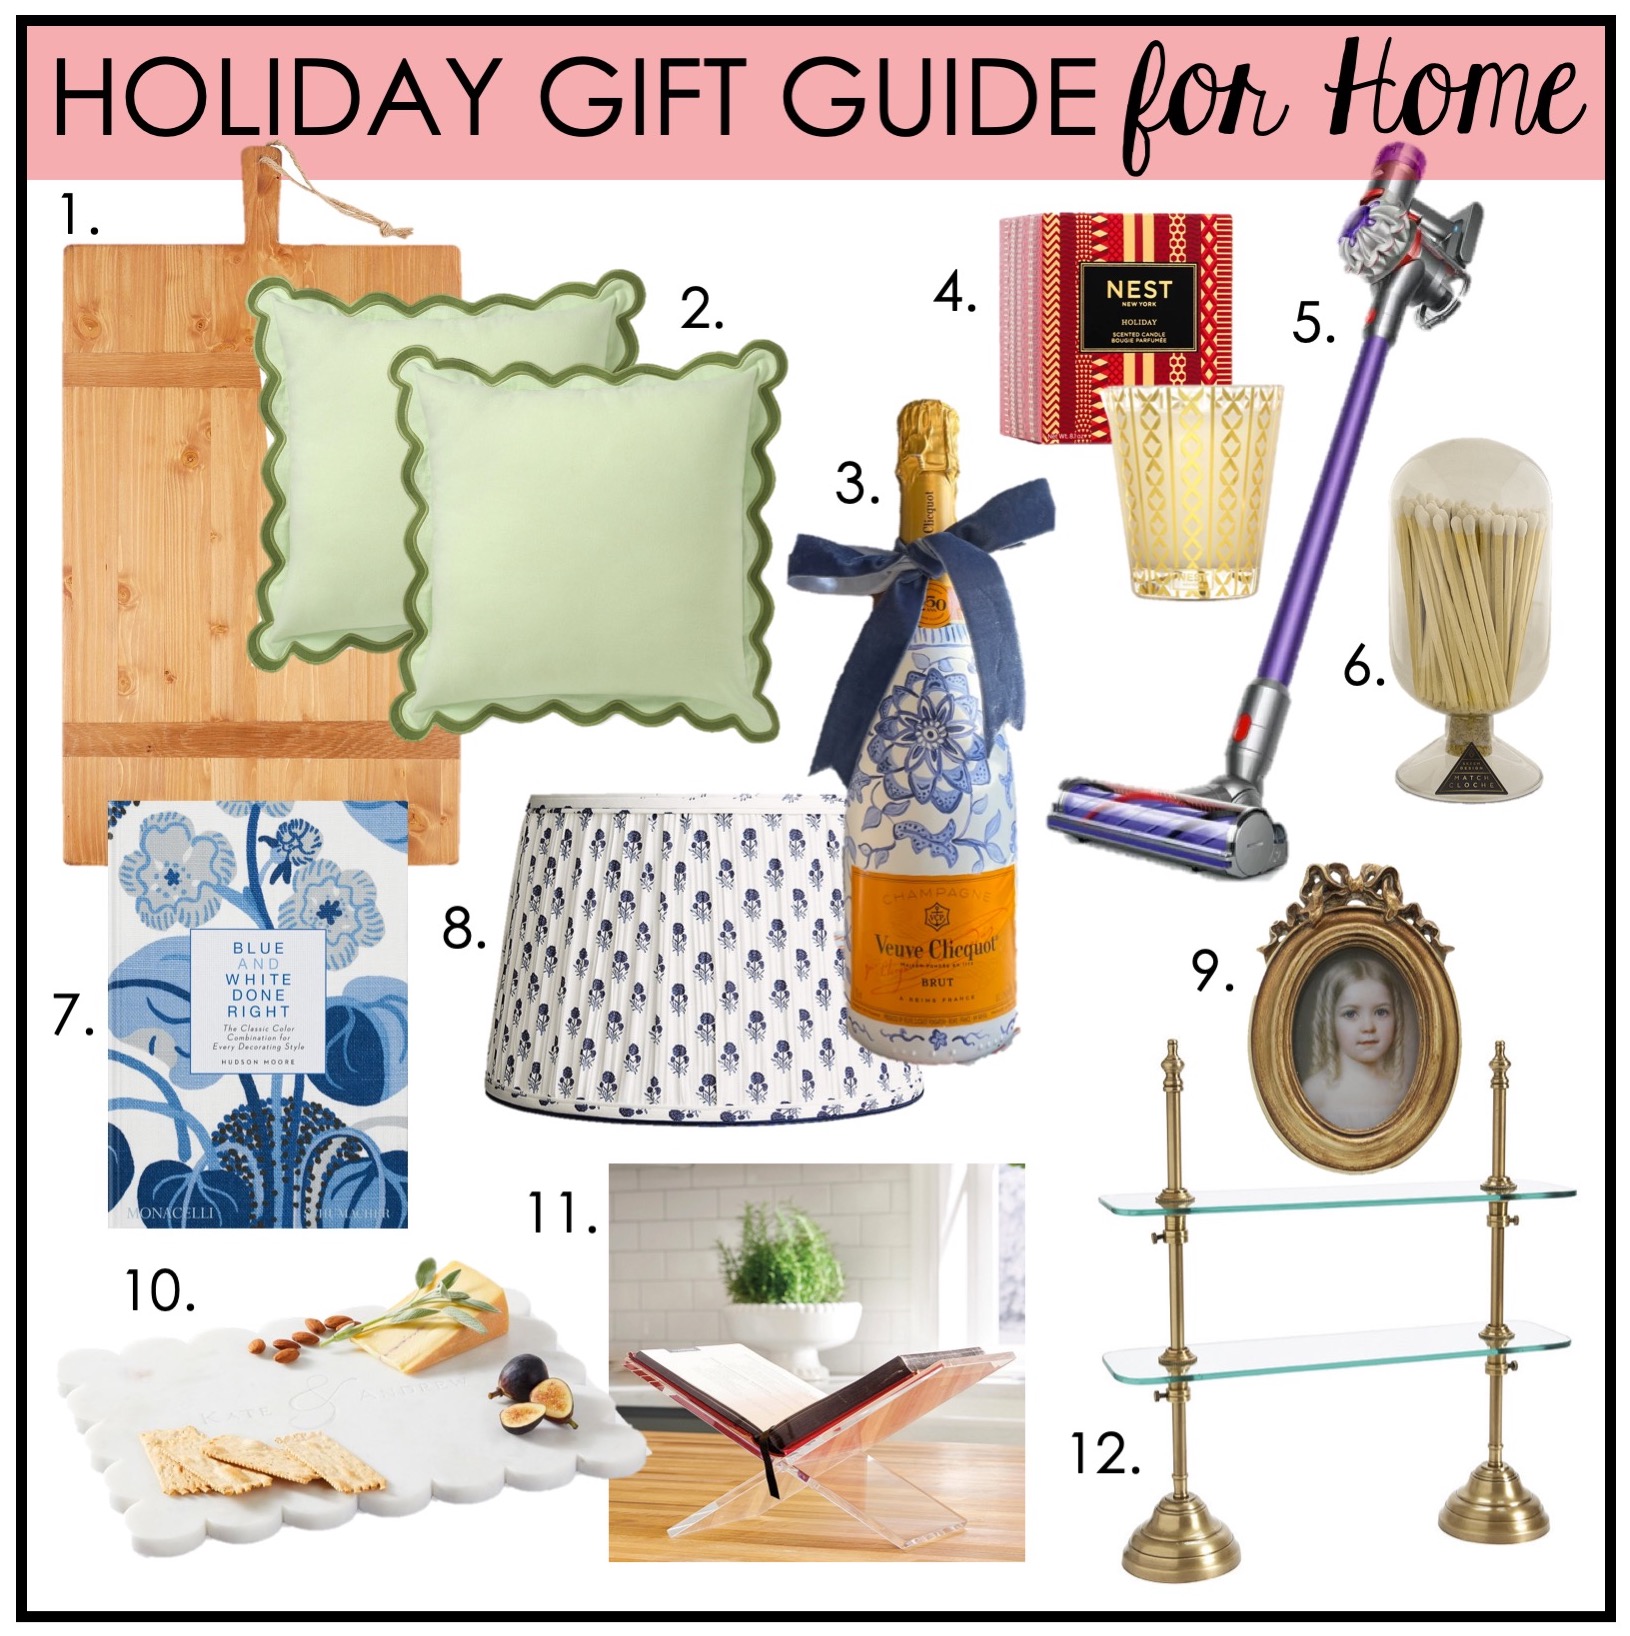 Best Gift Ideas & Home Gifts Guide 2023